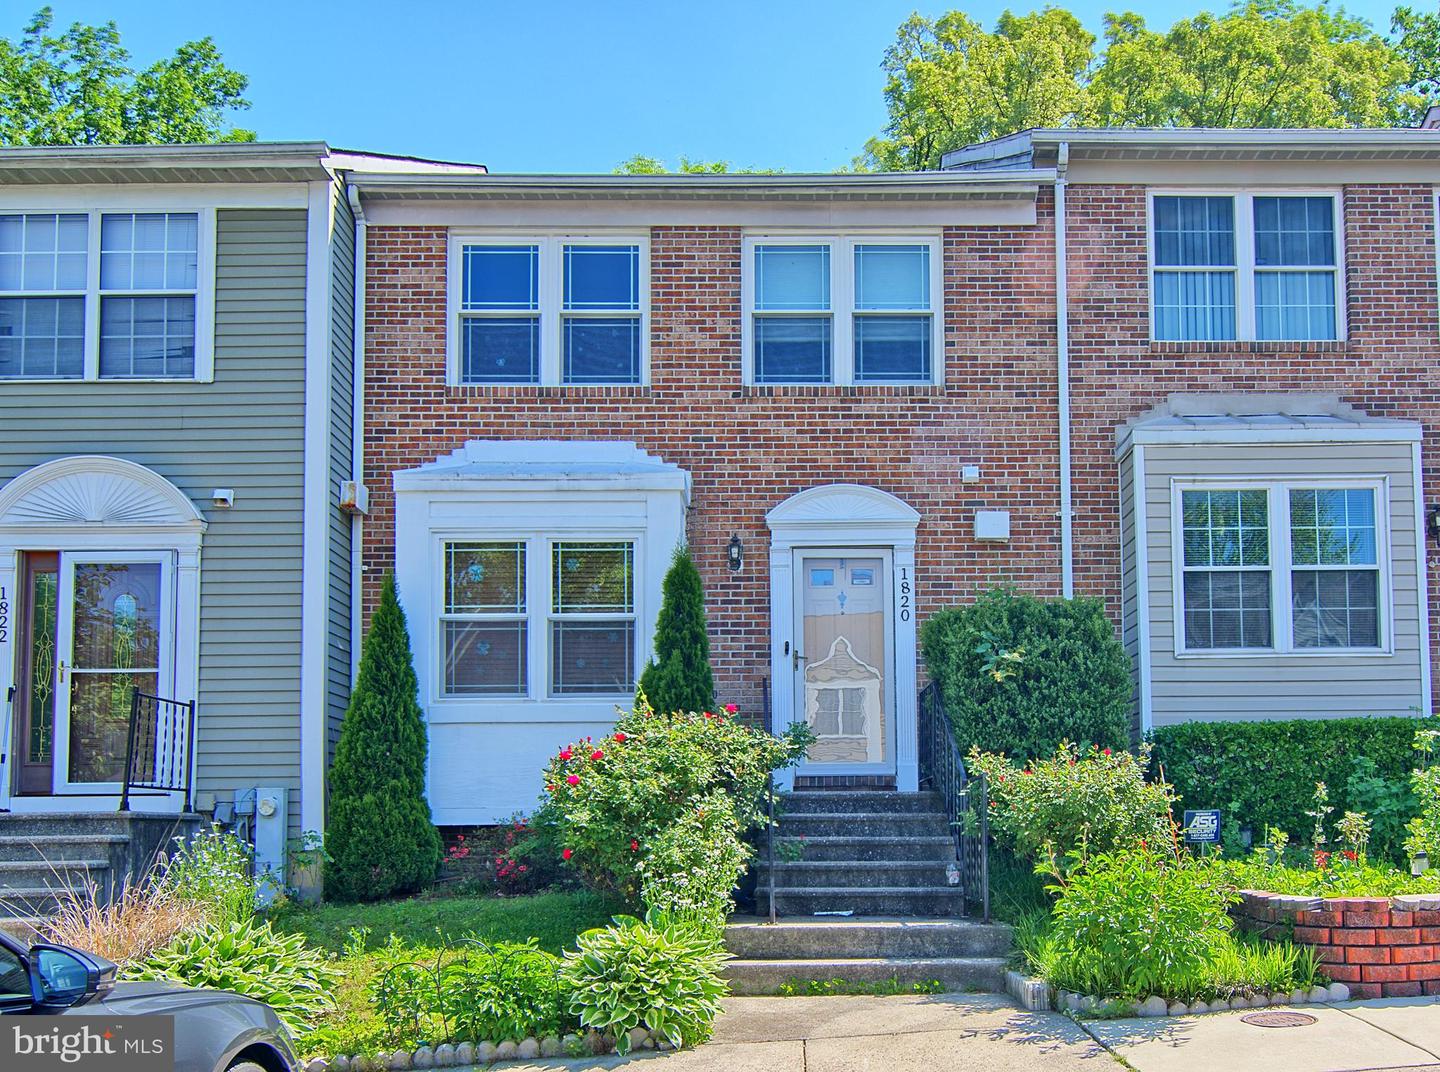 View Baltimore, MD 21209 townhome